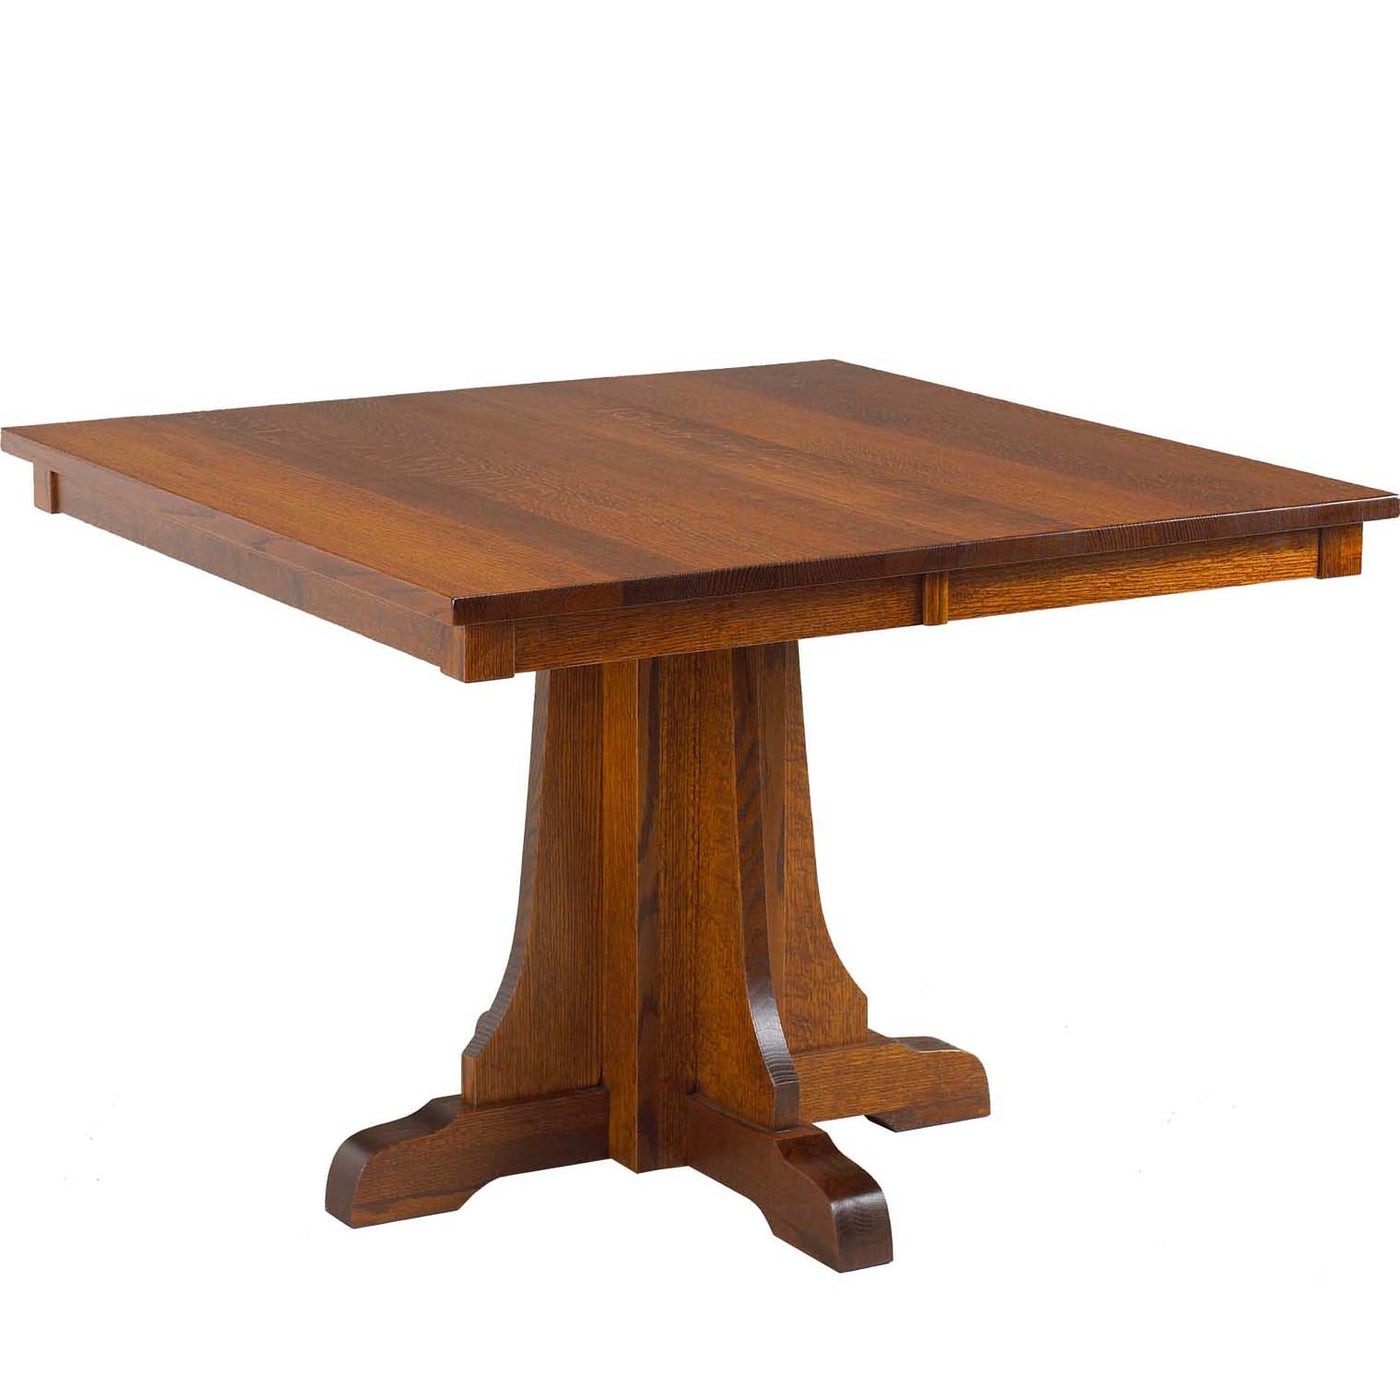 Cardinal Woodcraft solid wood Eastwood Dining Table